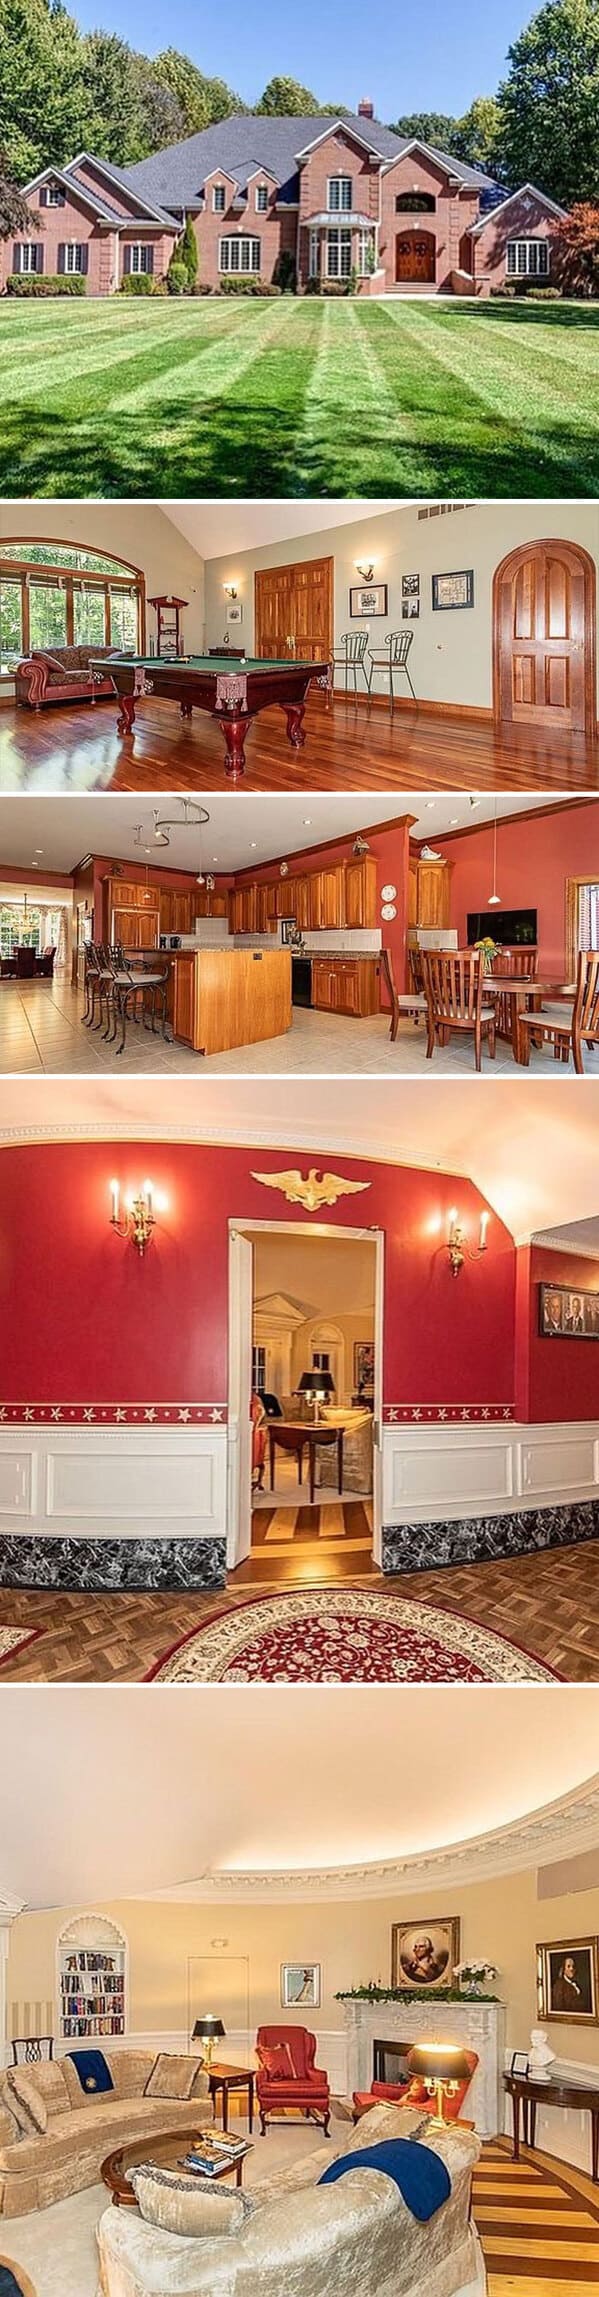 Zillow gone wild, weird and funny real estate listings, real estate agents who did extra, lol, funny pics of houses, ridiculous houses to buy, zillowgonewild, instagram, humor, funny pics